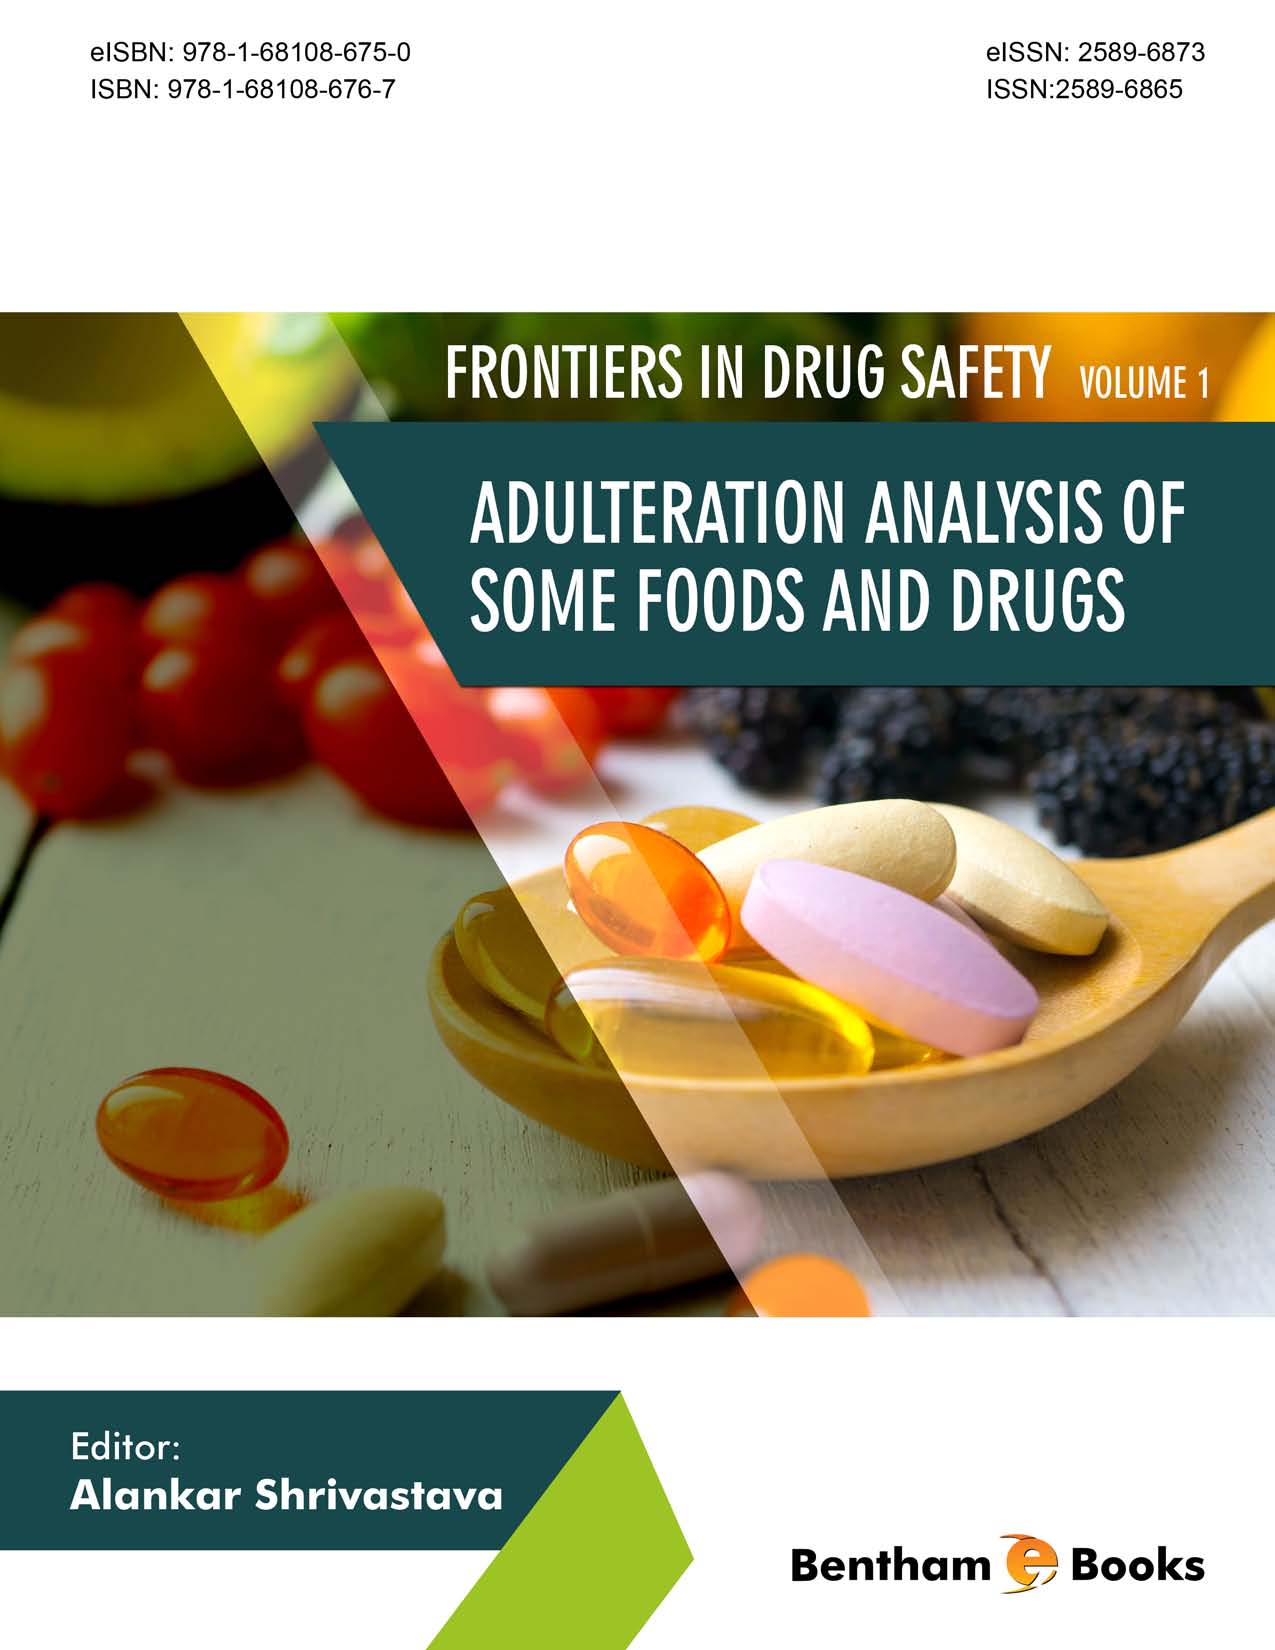 Adulteration Analysis of Some Foods and Drugs